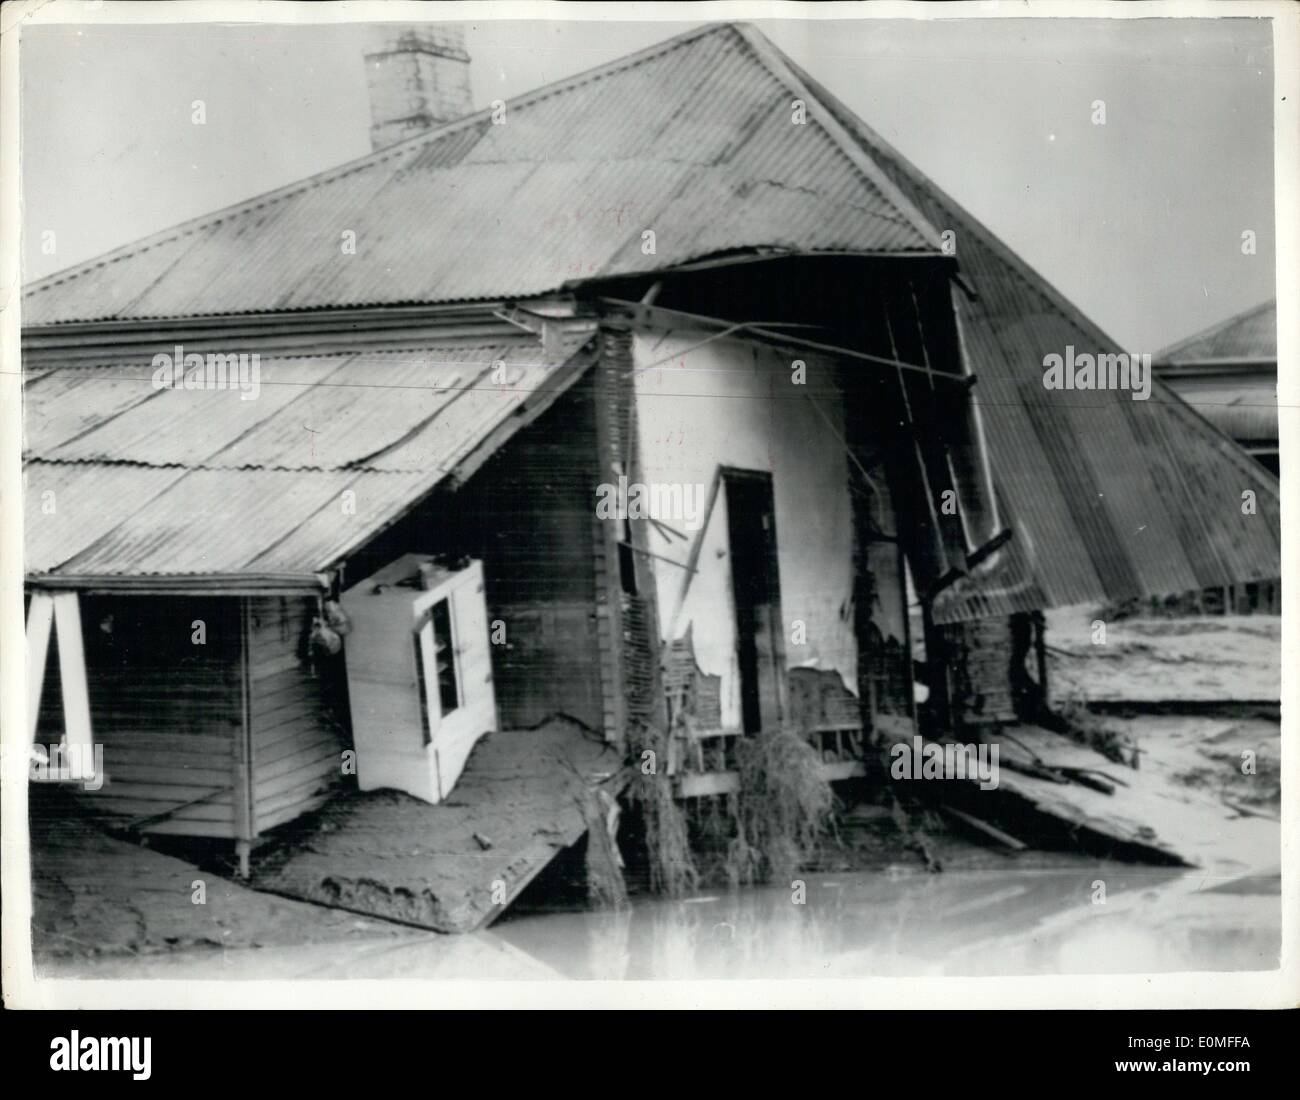 Mar. 03, 1955 - Flood devastation in New South Wales.. Wrecked house at Maitland: View of a completely wrecked house at Maitland, New South Wales - during the floods which caused widespread havoc and devastation recently... The damage and loss of property is estimated at many millions - and many lives were lost. Stock Photo